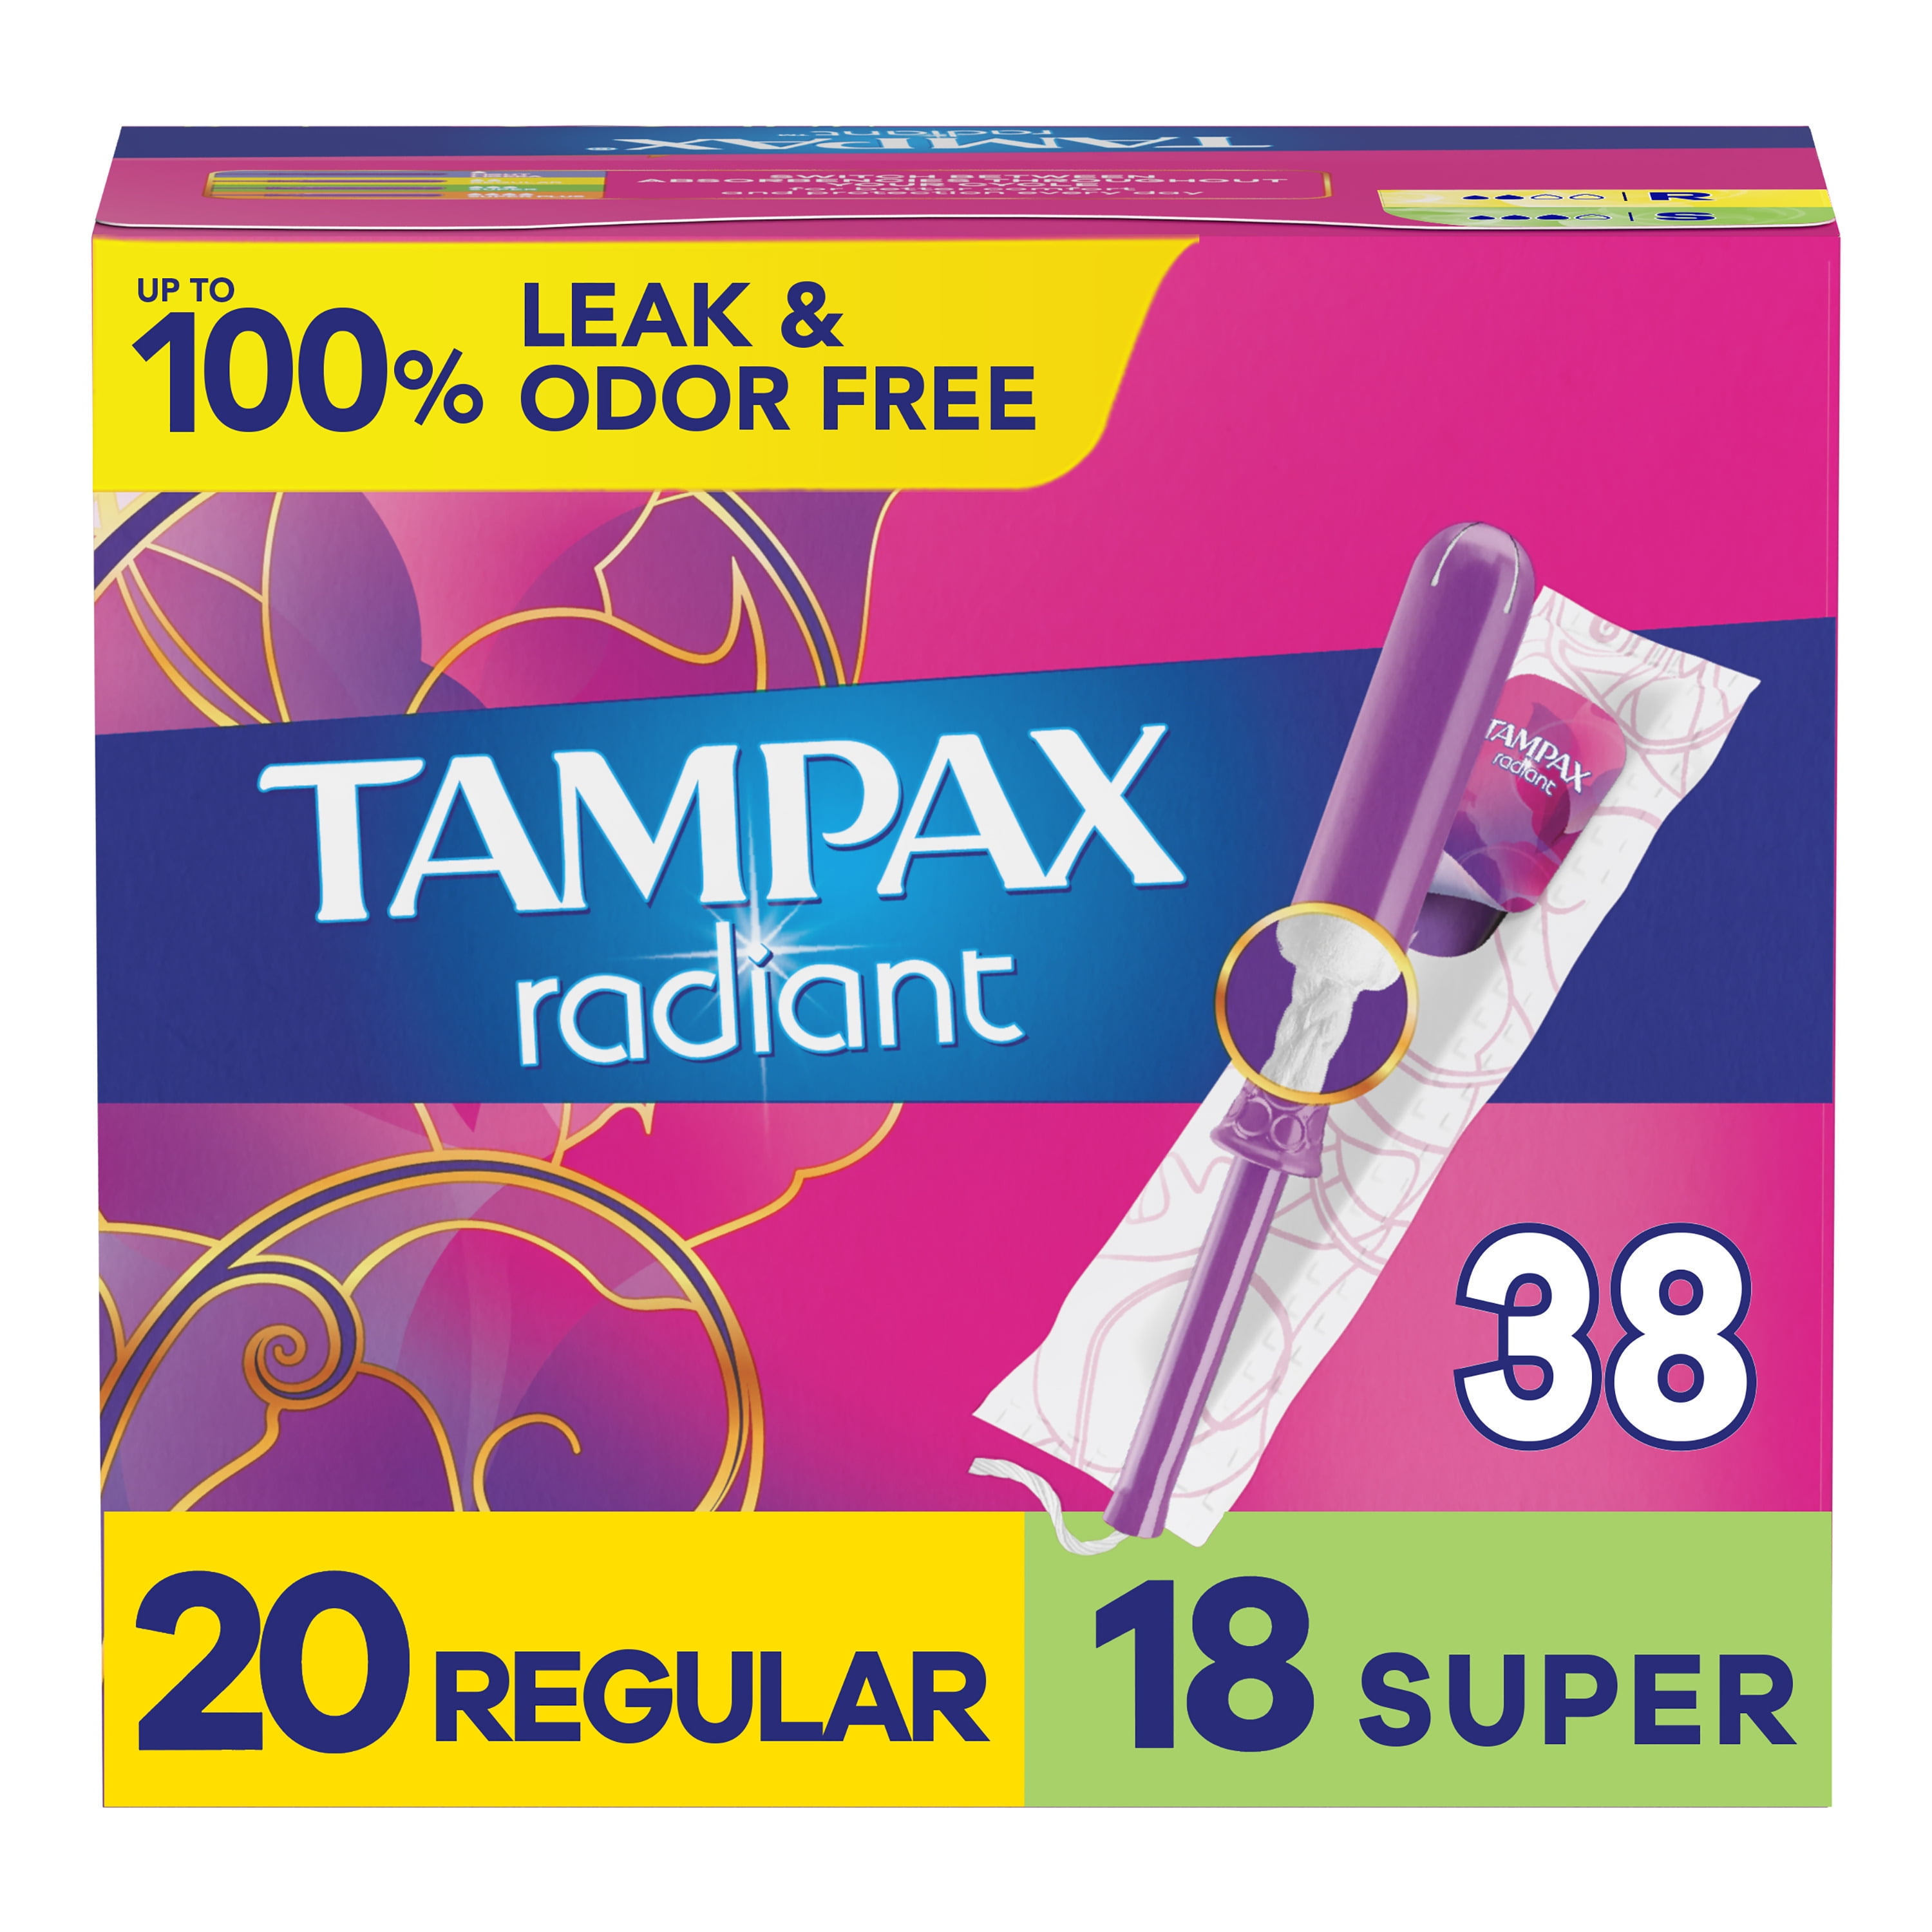 Tampax Tampons, Unscented, Triple Pack 34 Ea, Feminine Care